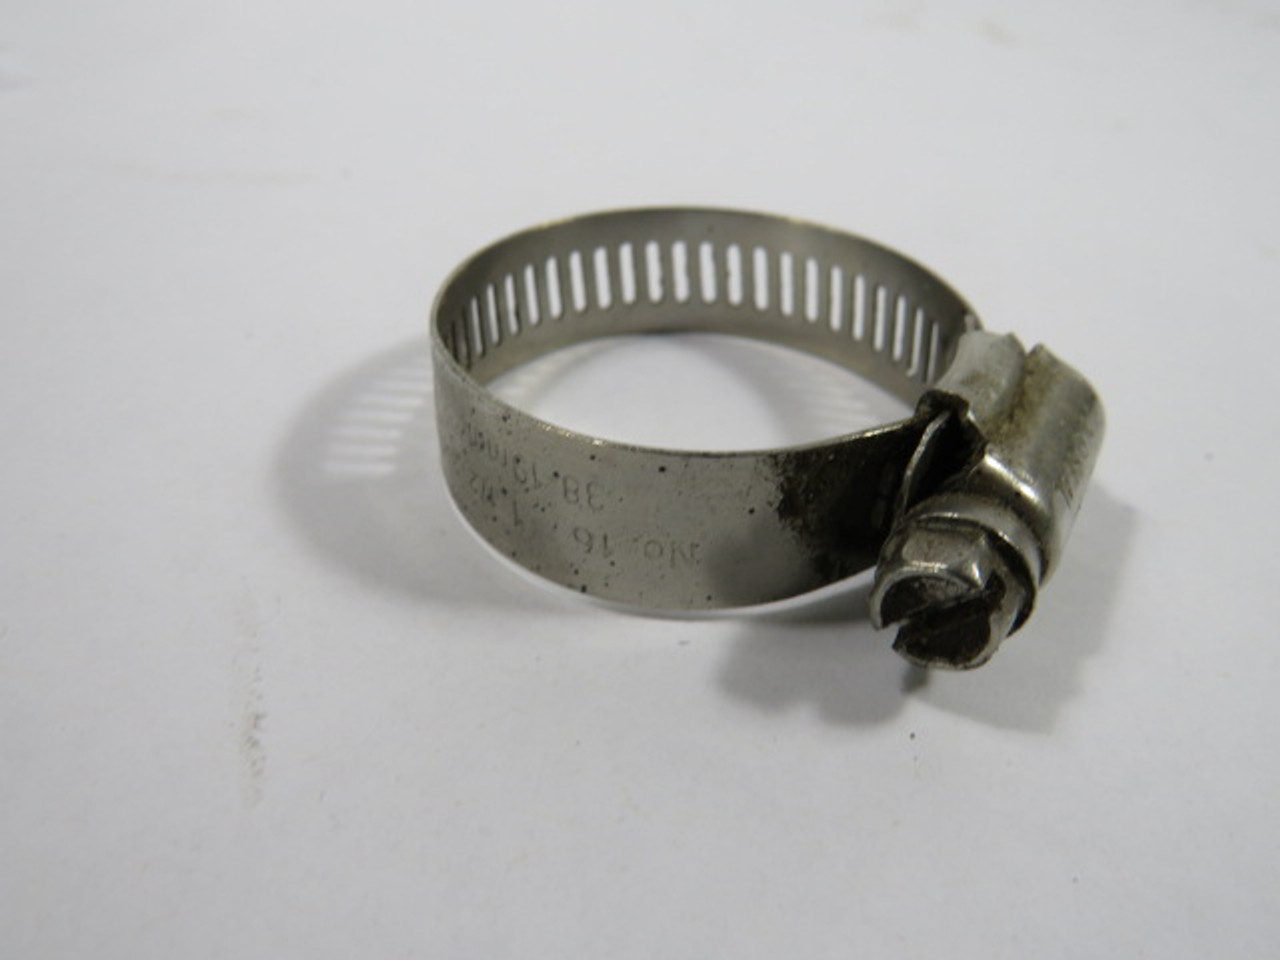 Murray Gold-Seal H16 Adjustable Stainless Worm Gear Hose Clamp 19-38mm USED